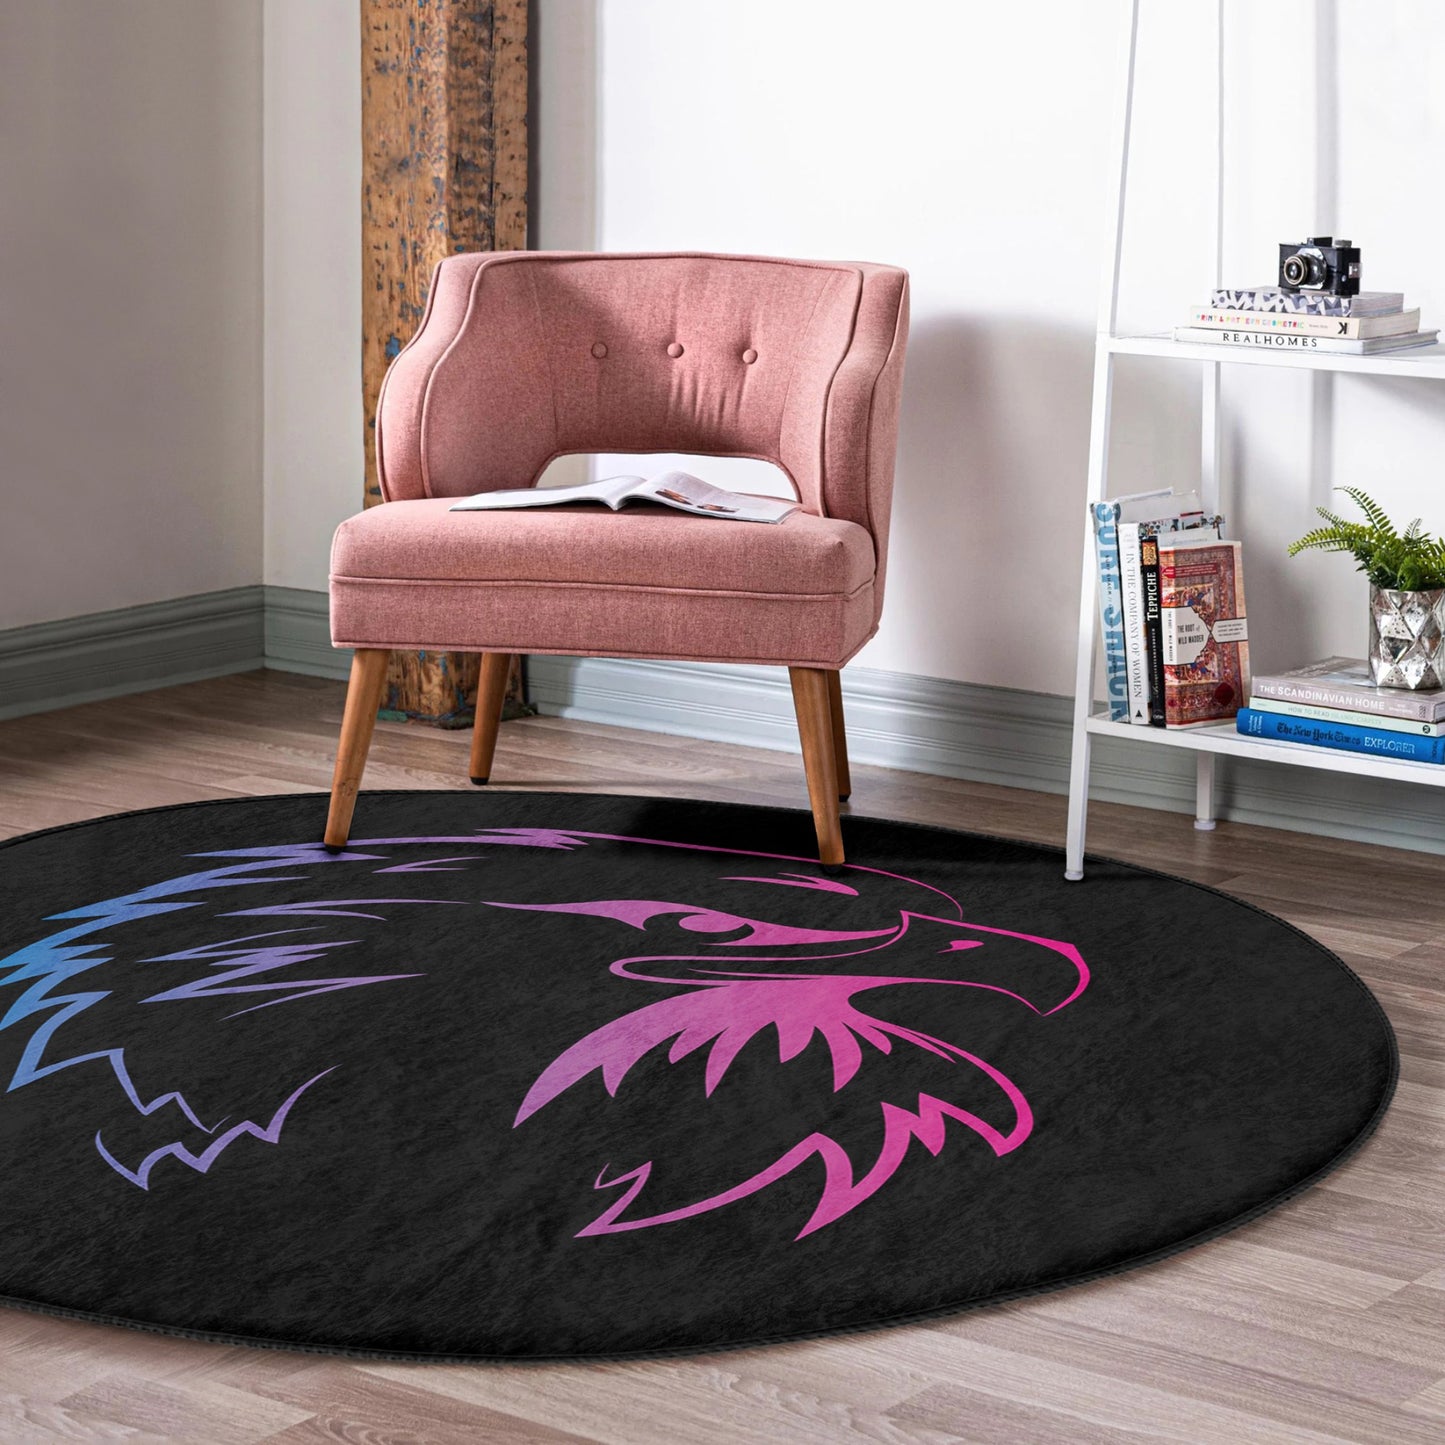 Washable Rug with Eagle Pattern - Easy Maintenance